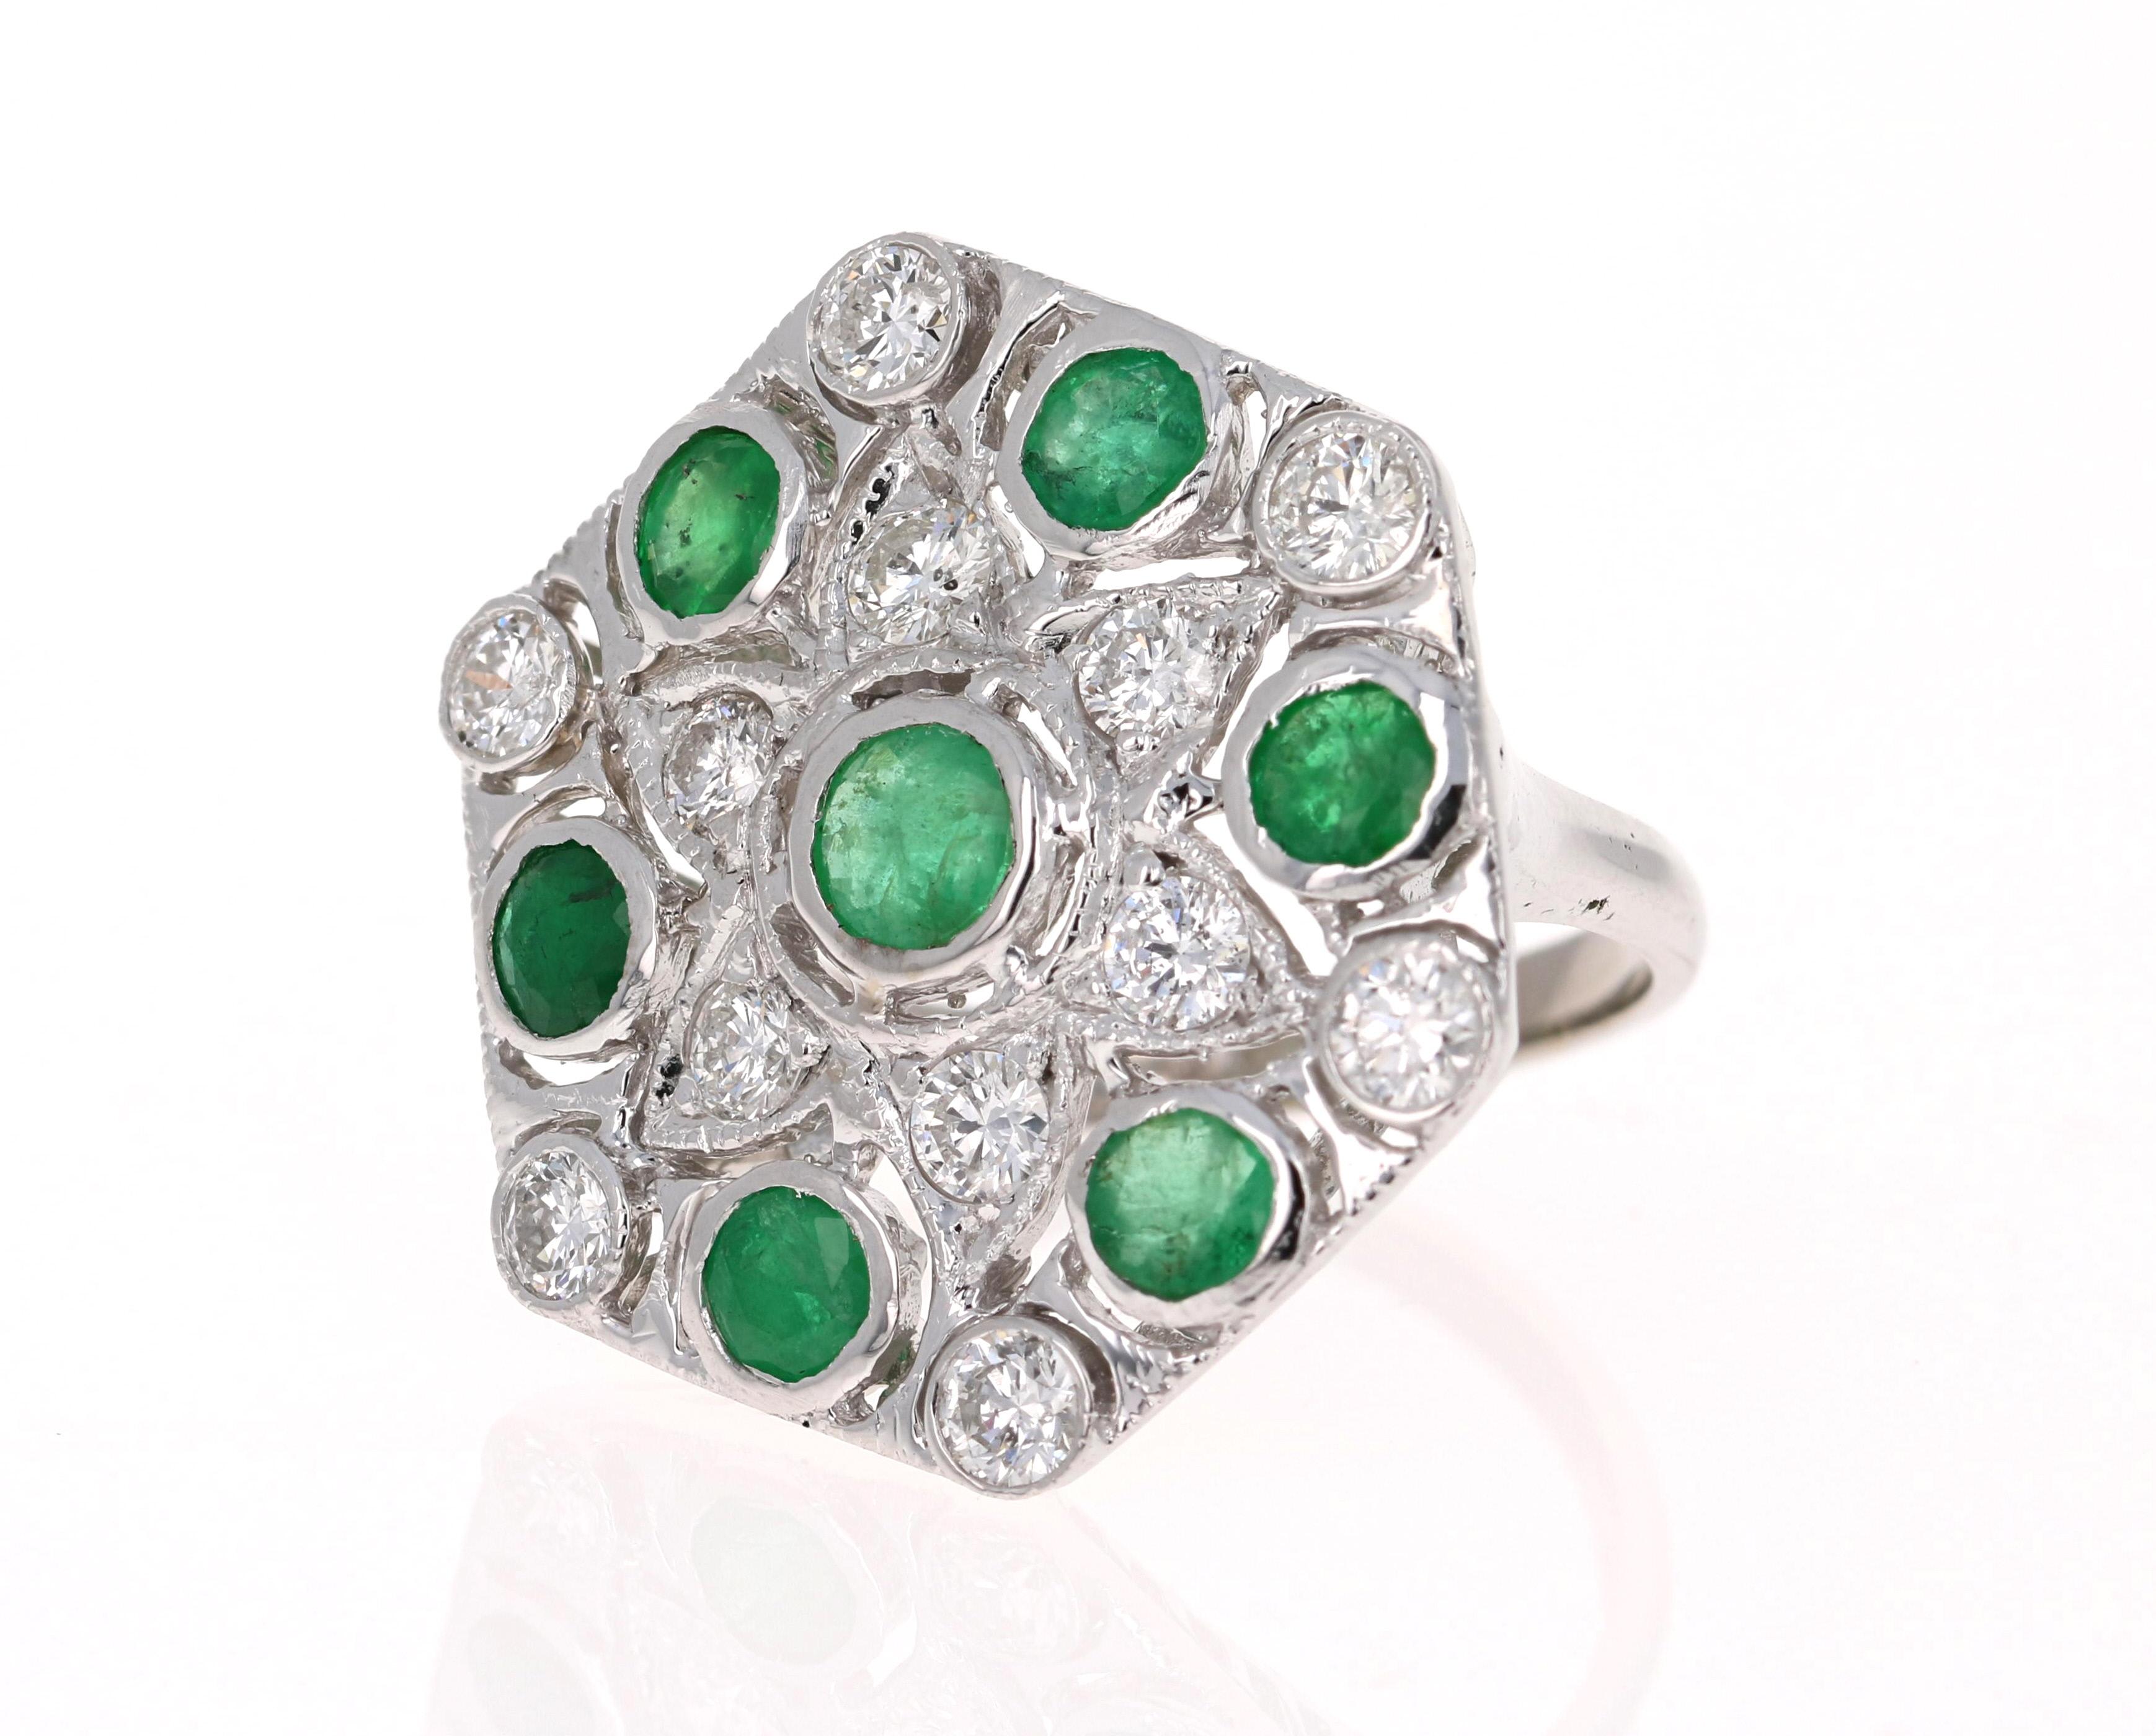 7 Round Cut Emeralds that weigh 2.04 Carats.
12 Round Cut Diamonds that weigh 1.39 Carats (Clarity: SI2, Color: F)
14K White Gold with an approximate gold weight of 8.5 Grams.
It is a size 7 and can be resized, if needed, at no additional charge.